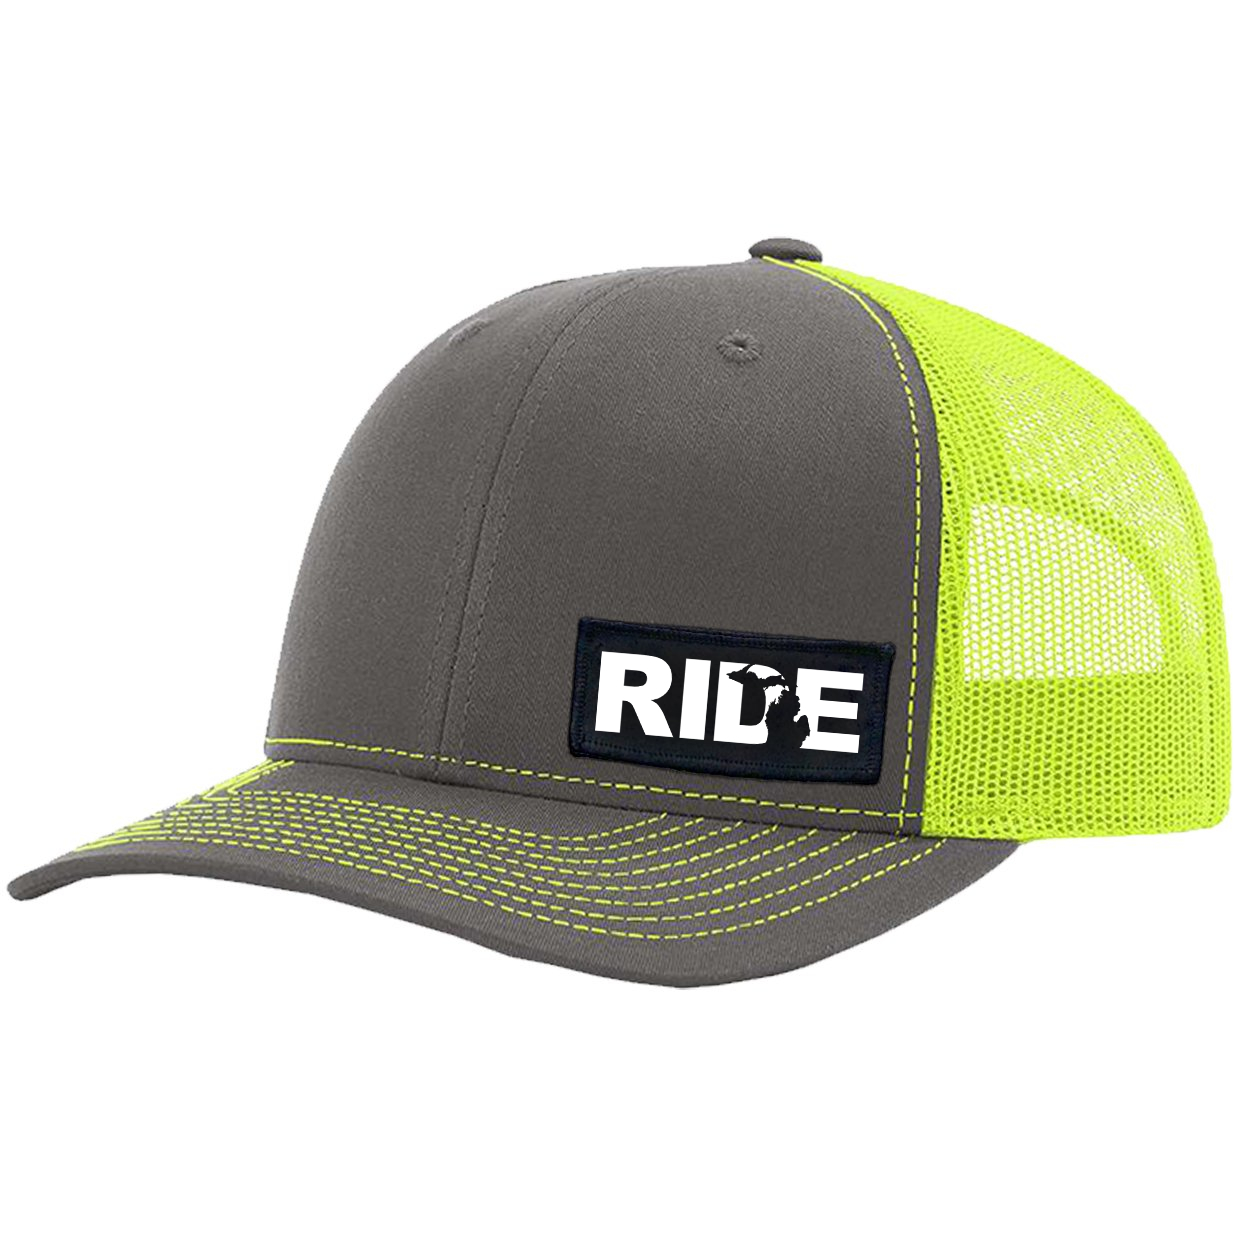 Ride Michigan Night Out Woven Patch Snapback Trucker Hat Charcoal/Neon Yellow (White Logo)